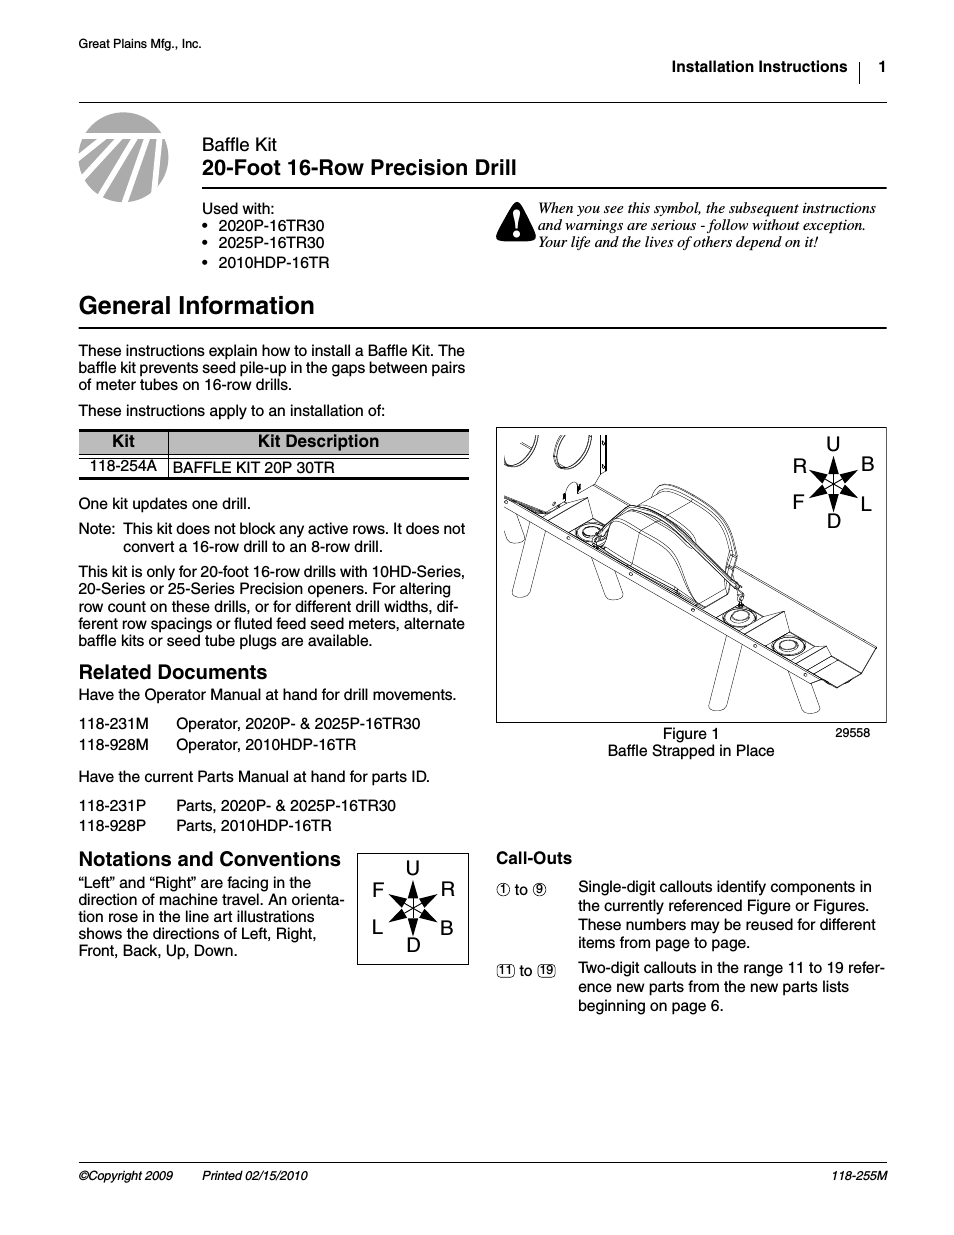 2010HDP-16TR Assembly Instructions